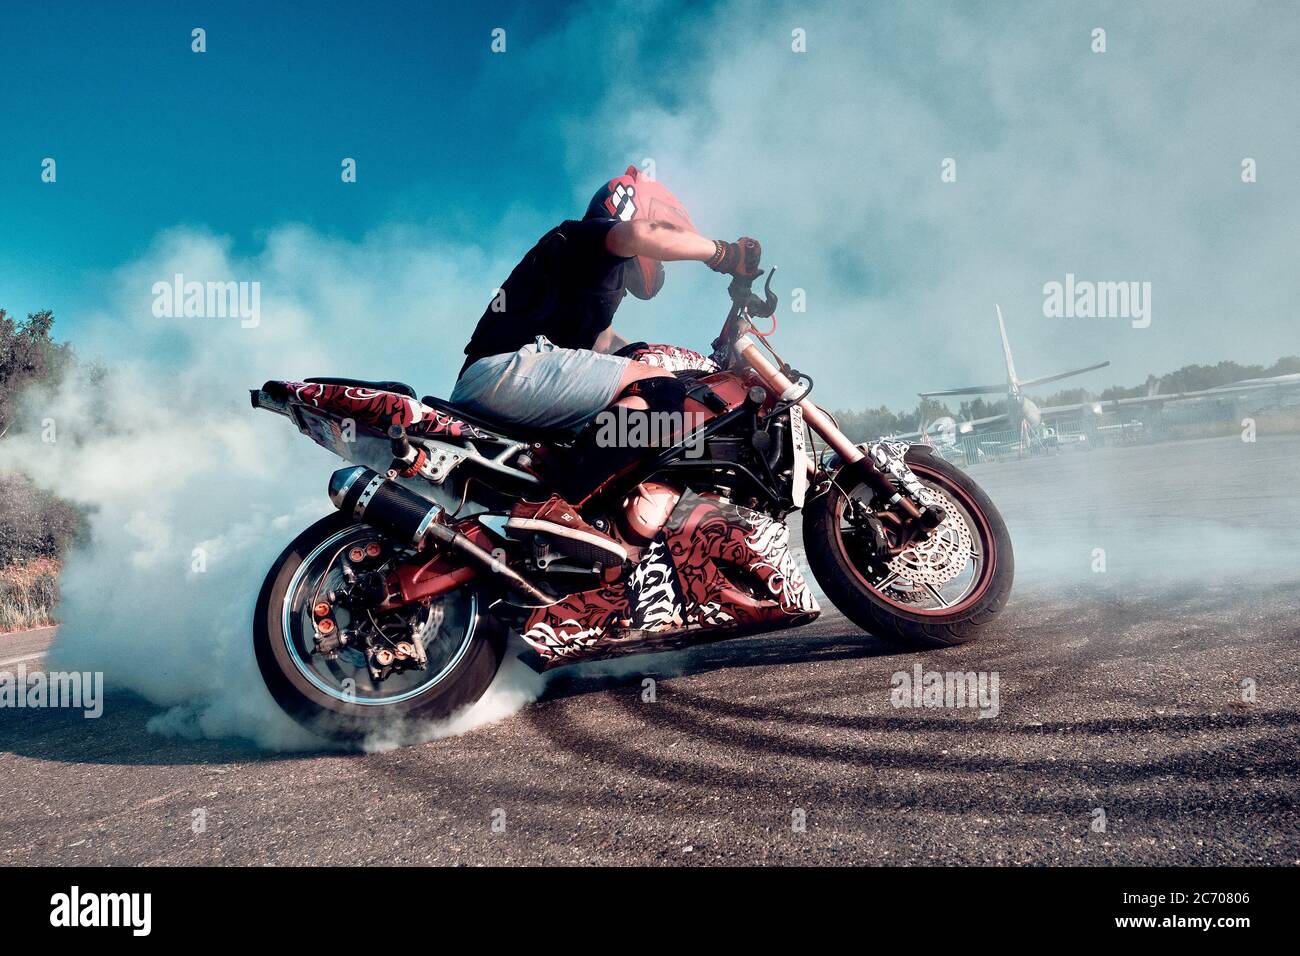 Moscow, Russia - 13 Jul 2020: Moto rider making a wheels burn on his  motorbike. Stunt motorcycle rider performing motorcycle show. Motorcyclist  making Stock Photo - Alamy